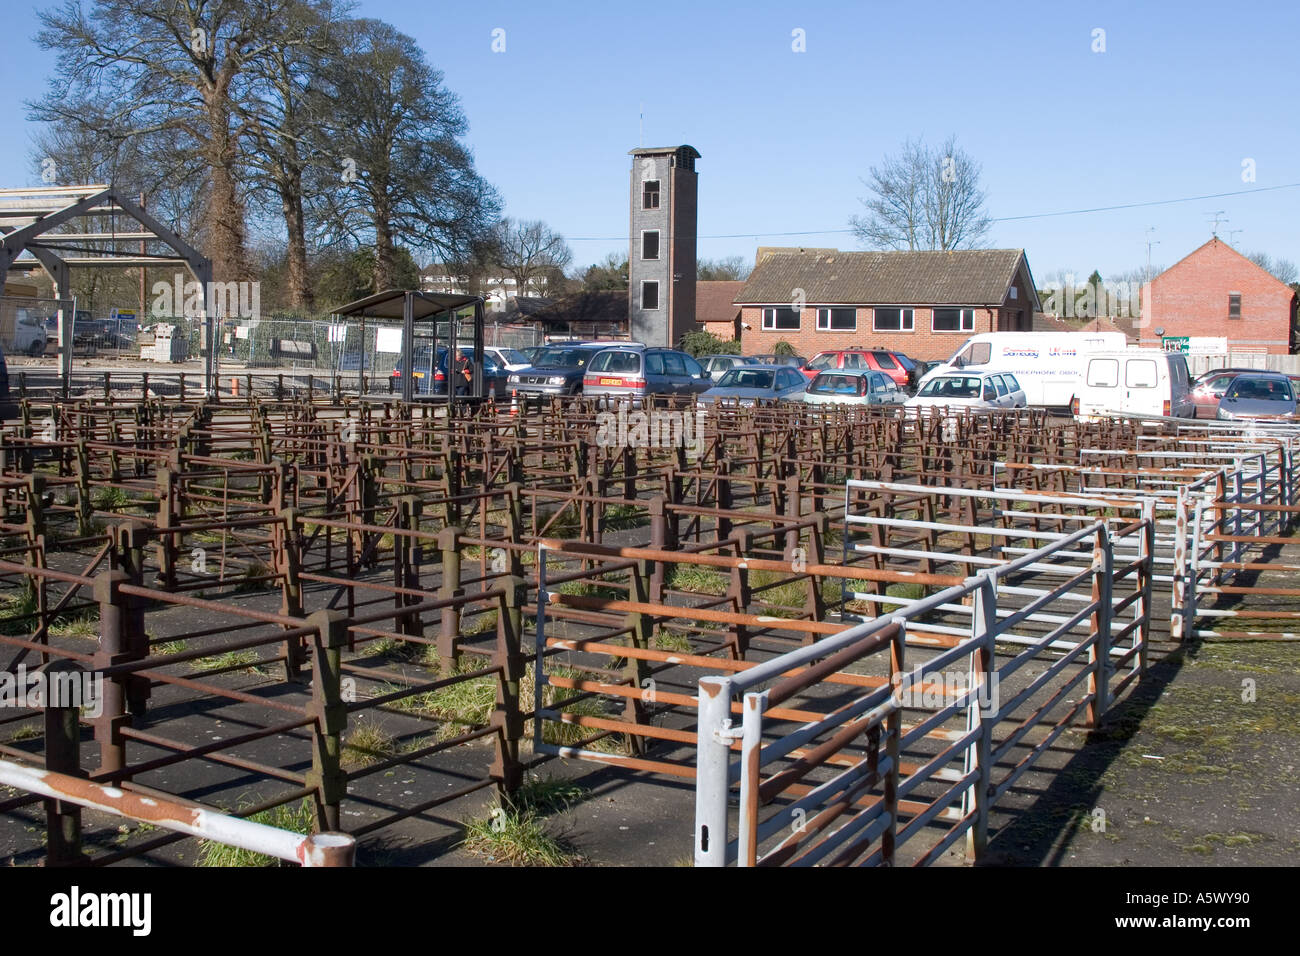 https://c8.alamy.com/comp/A5WY90/the-old-cattle-market-tring-hertfordshire-A5WY90.jpg